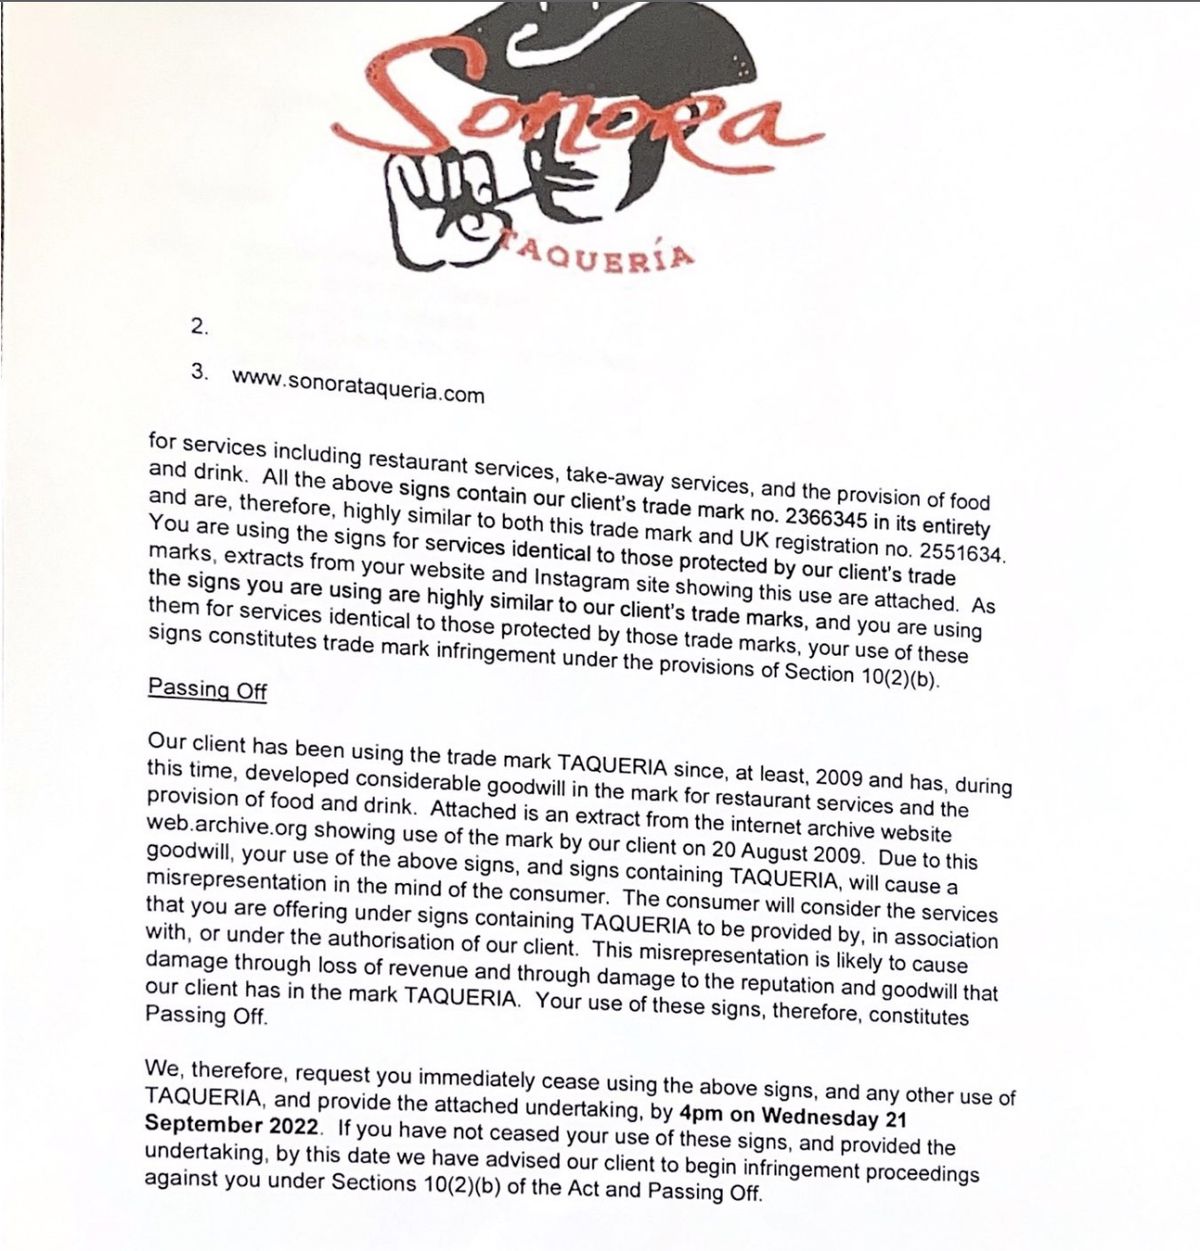 A scan of a legal letter listing the alleged copyright infringement of the Taquria brand.